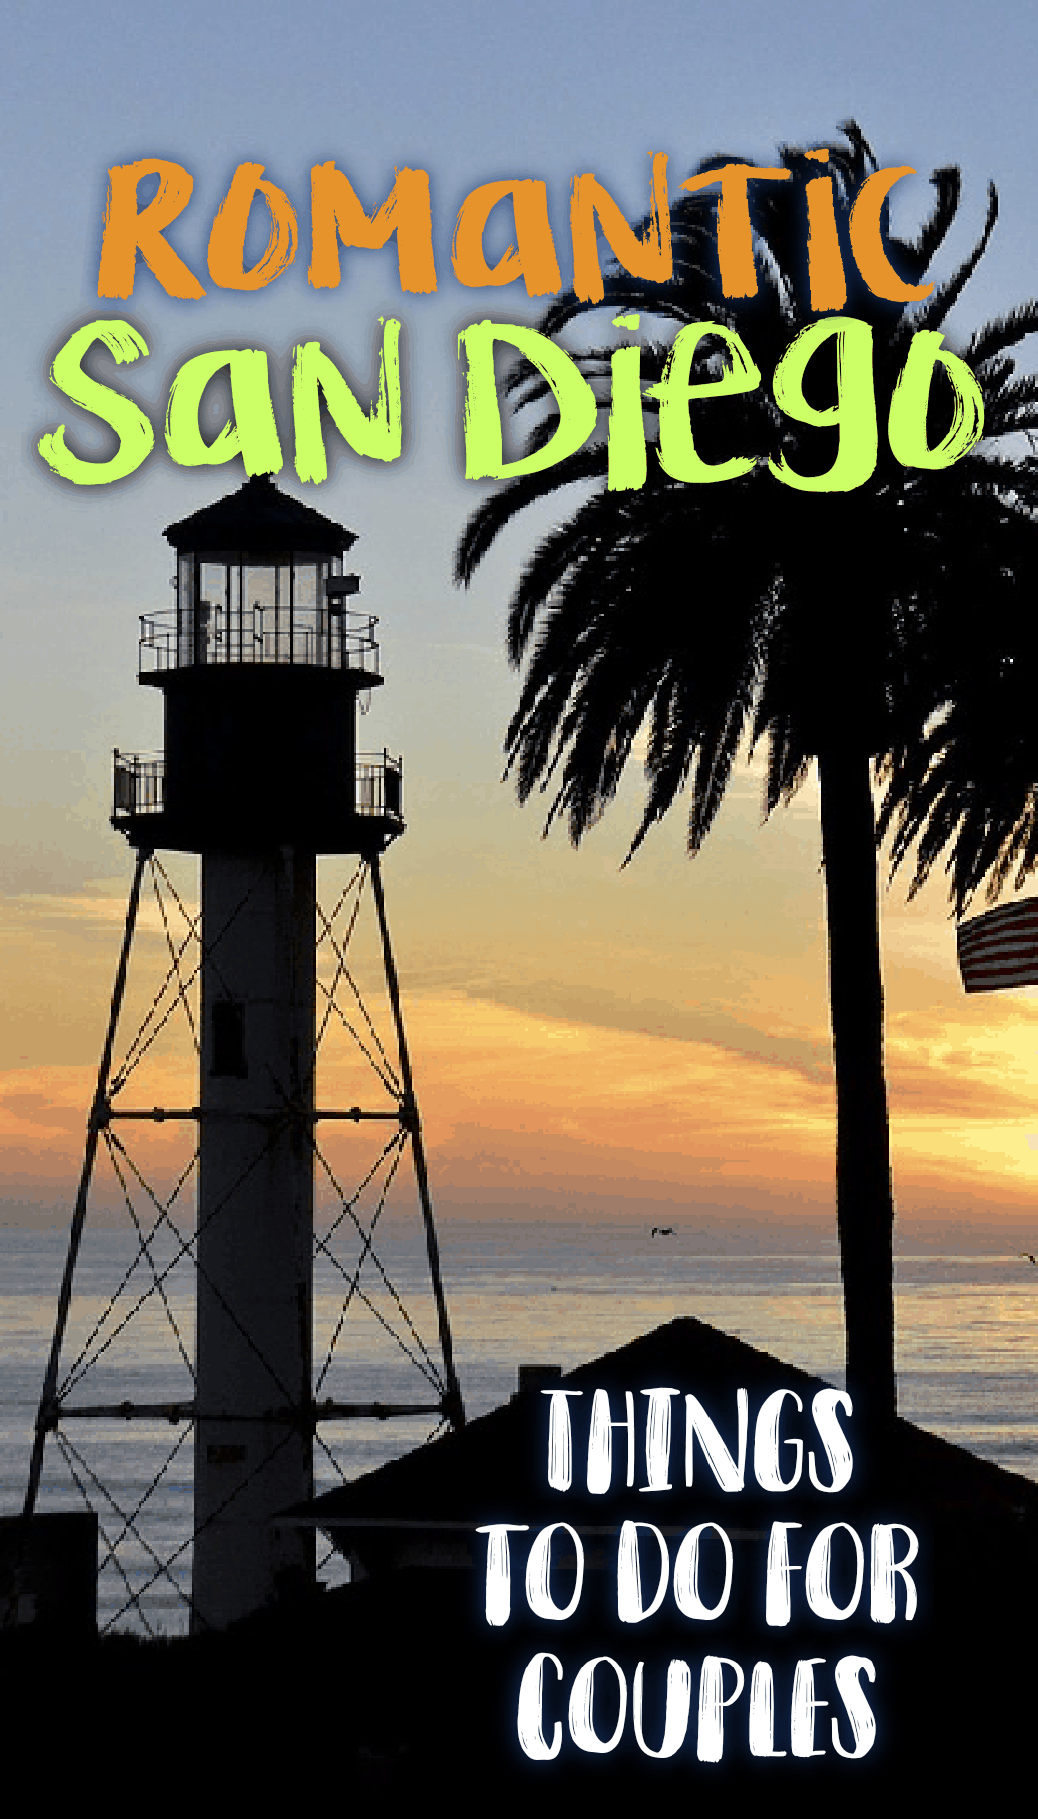 Pinterest social image that says “Romantic San Diego things to do for couples.”